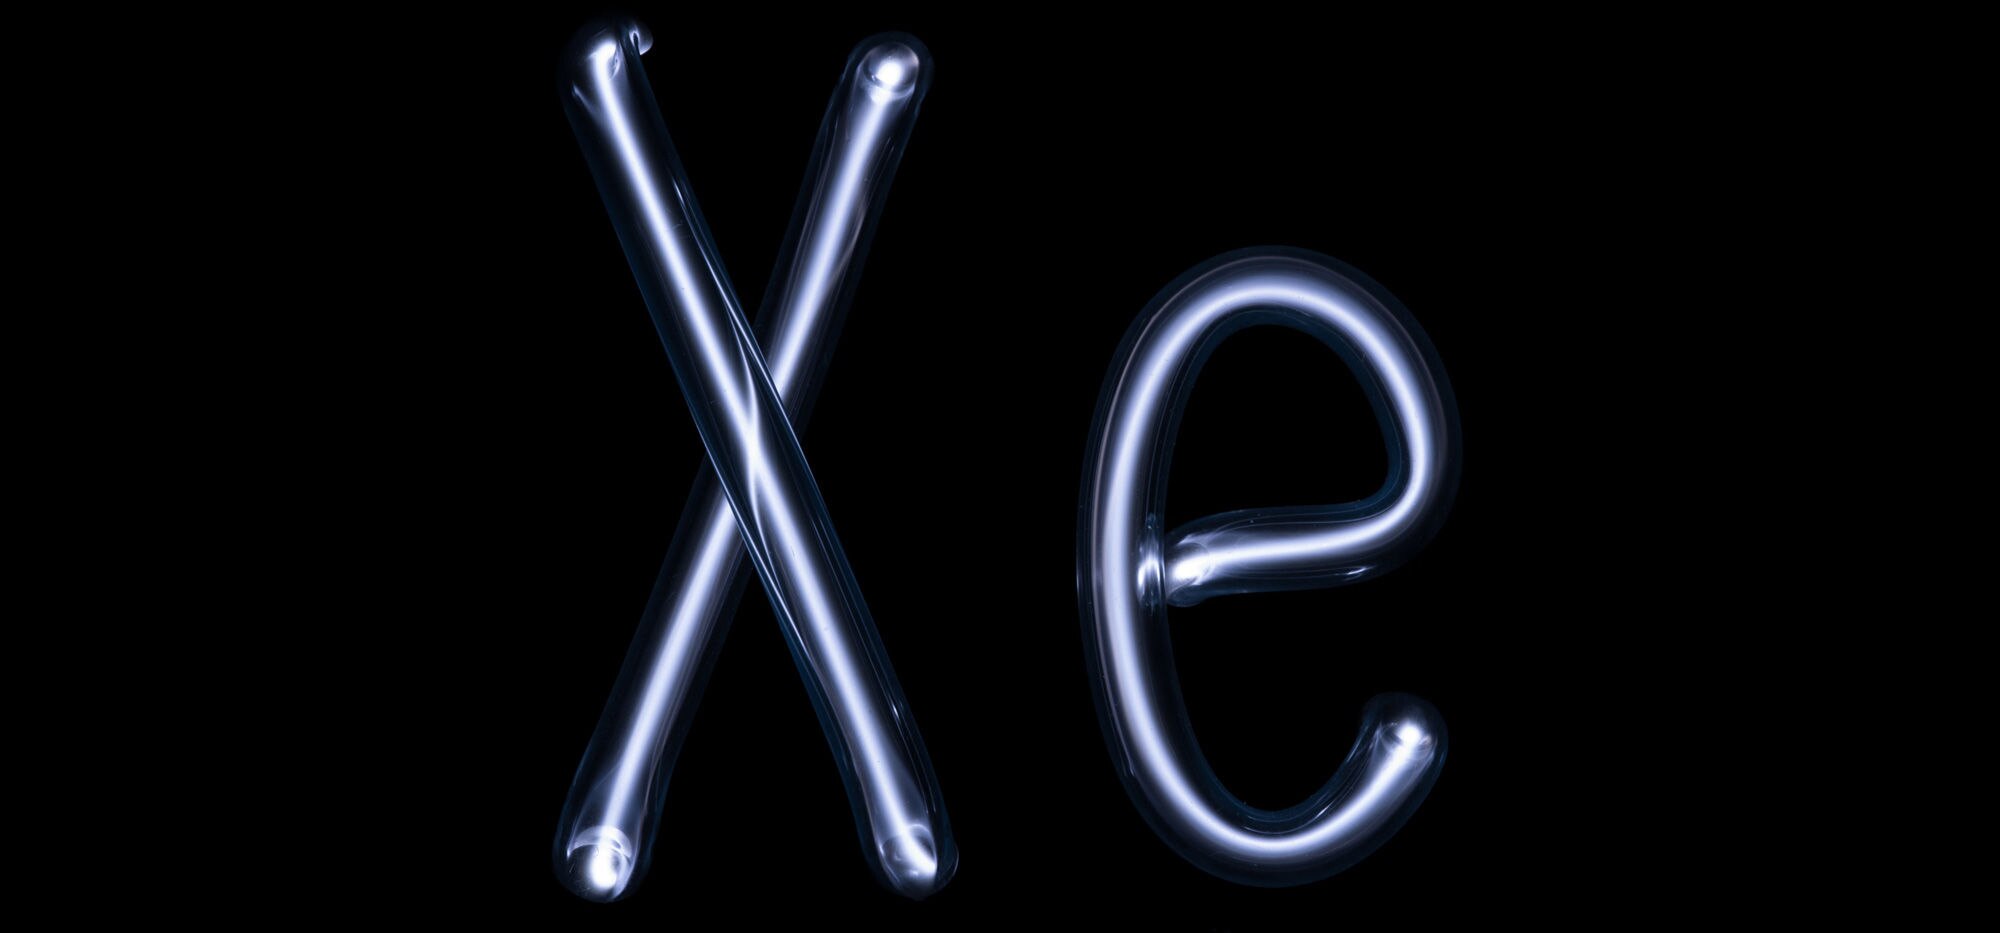 Xenon glows blue when excited by an electric field. These glass tubes, shaped in xenon’s element symbol, are filled with xenon gas. This doesn’t have anything to do with the article, really, but I thought it was fun and clever. Credit: Pslawinski / wikipe